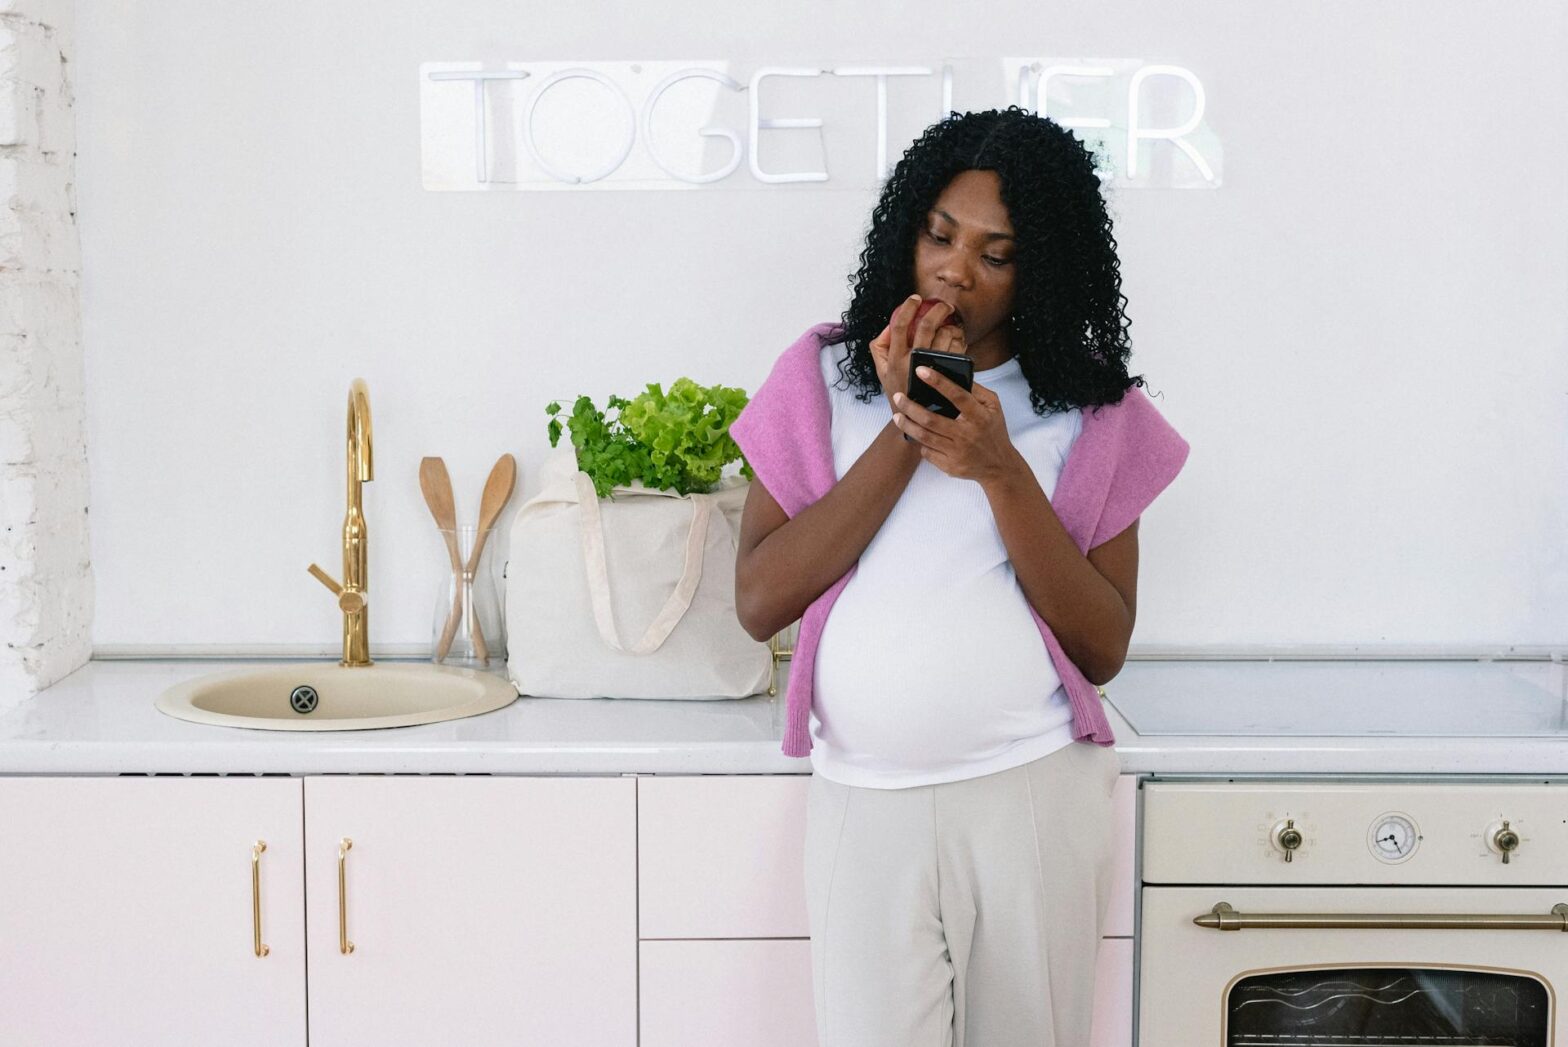 Black pregnant woman with smartphone eating in kitchen